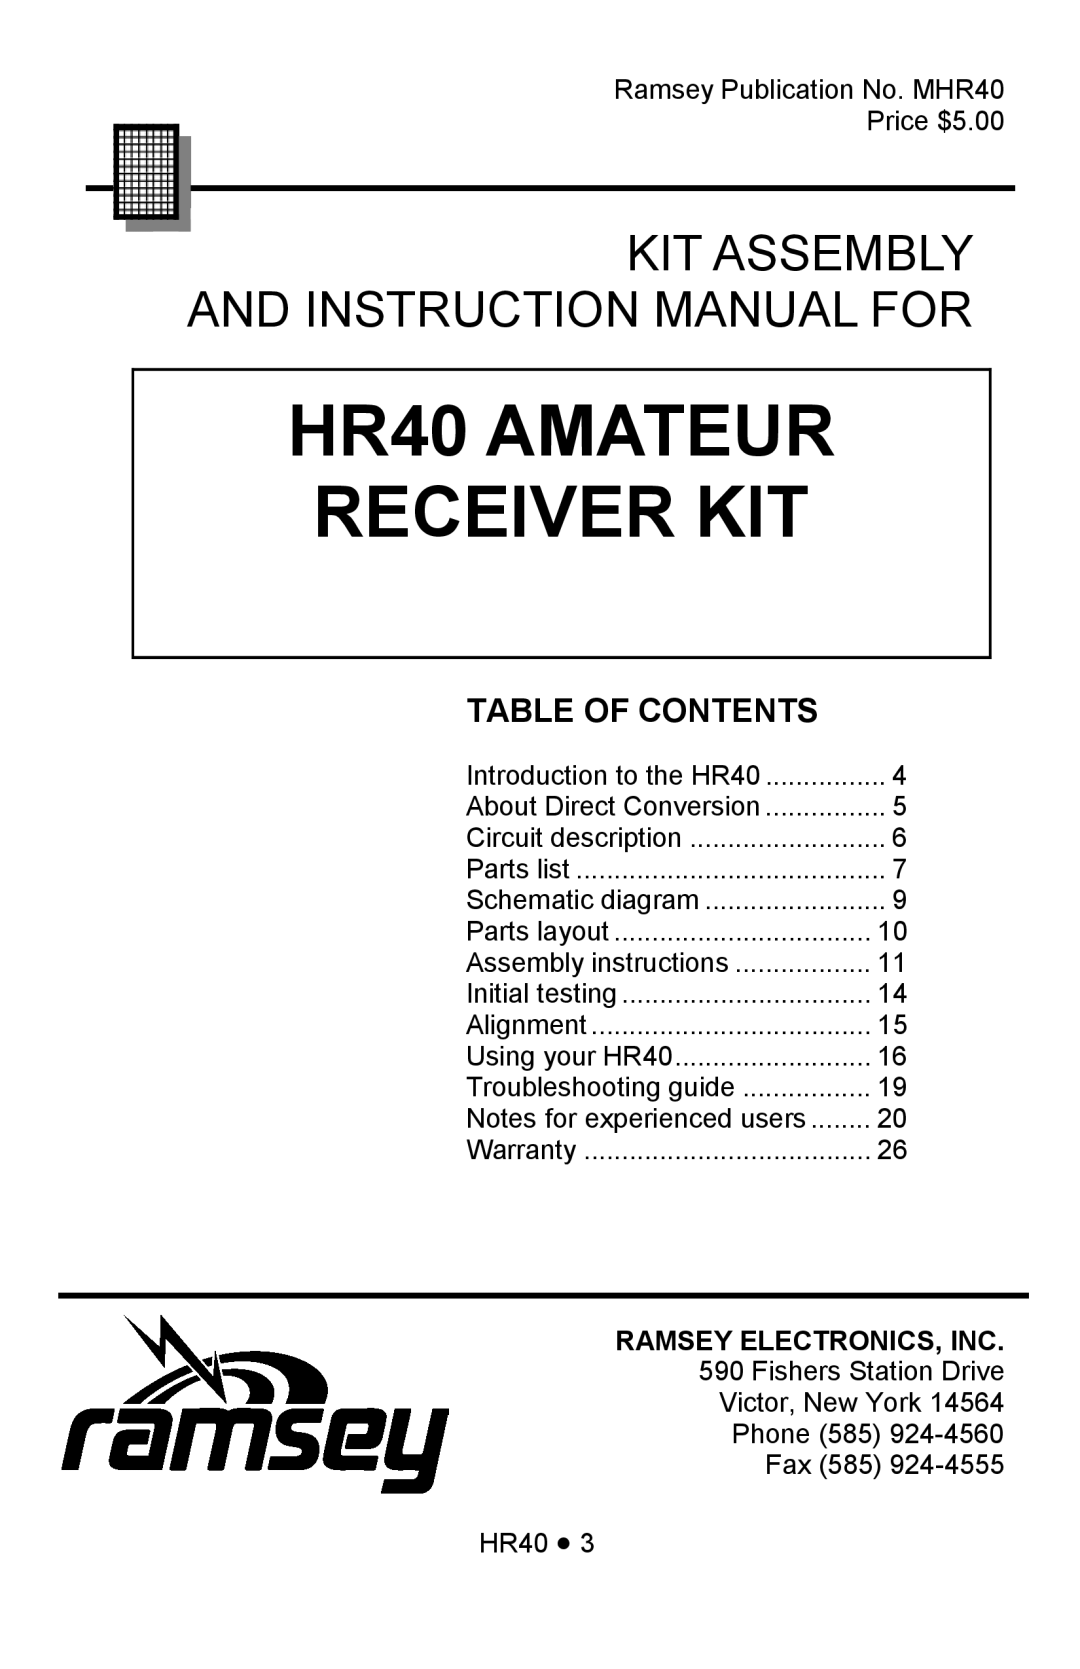 Ramsey Electronics manual HR40 AMATEUR RECEIVER KIT, Kit Assembly, Table Of Contents 